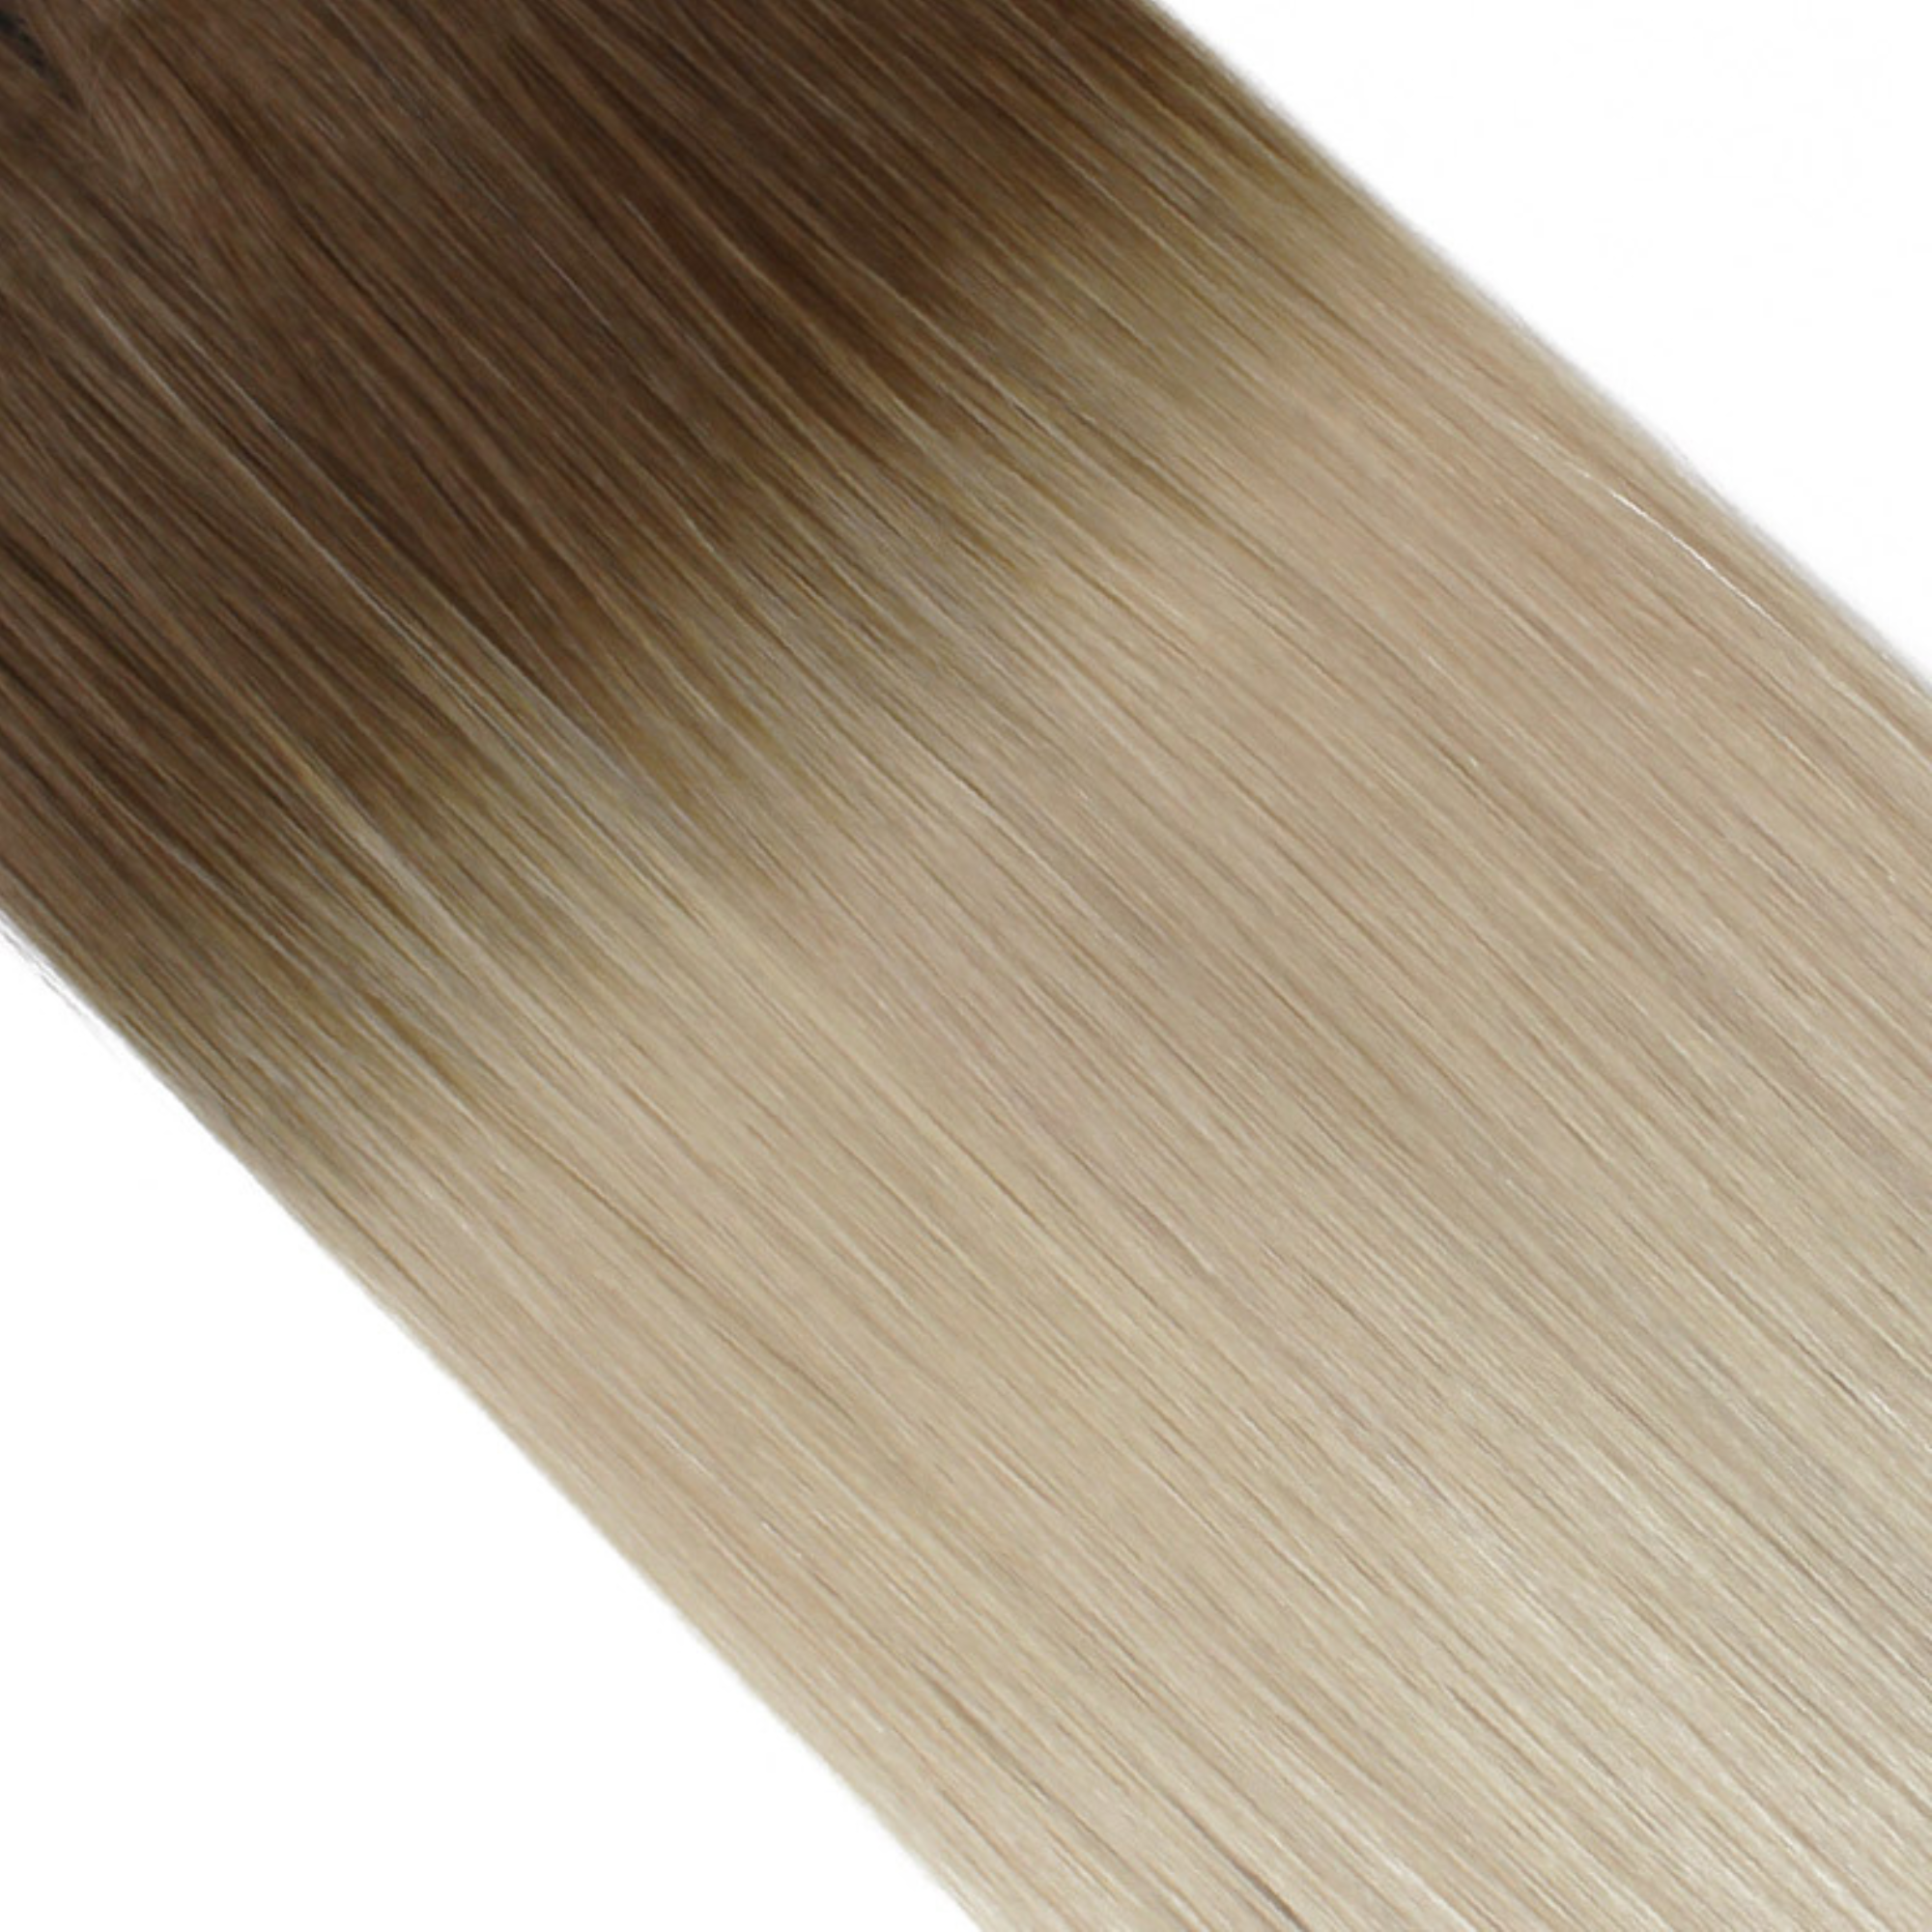 "hair rehab london 14" tape hair extensions shade swatch titled rooted blonde af"